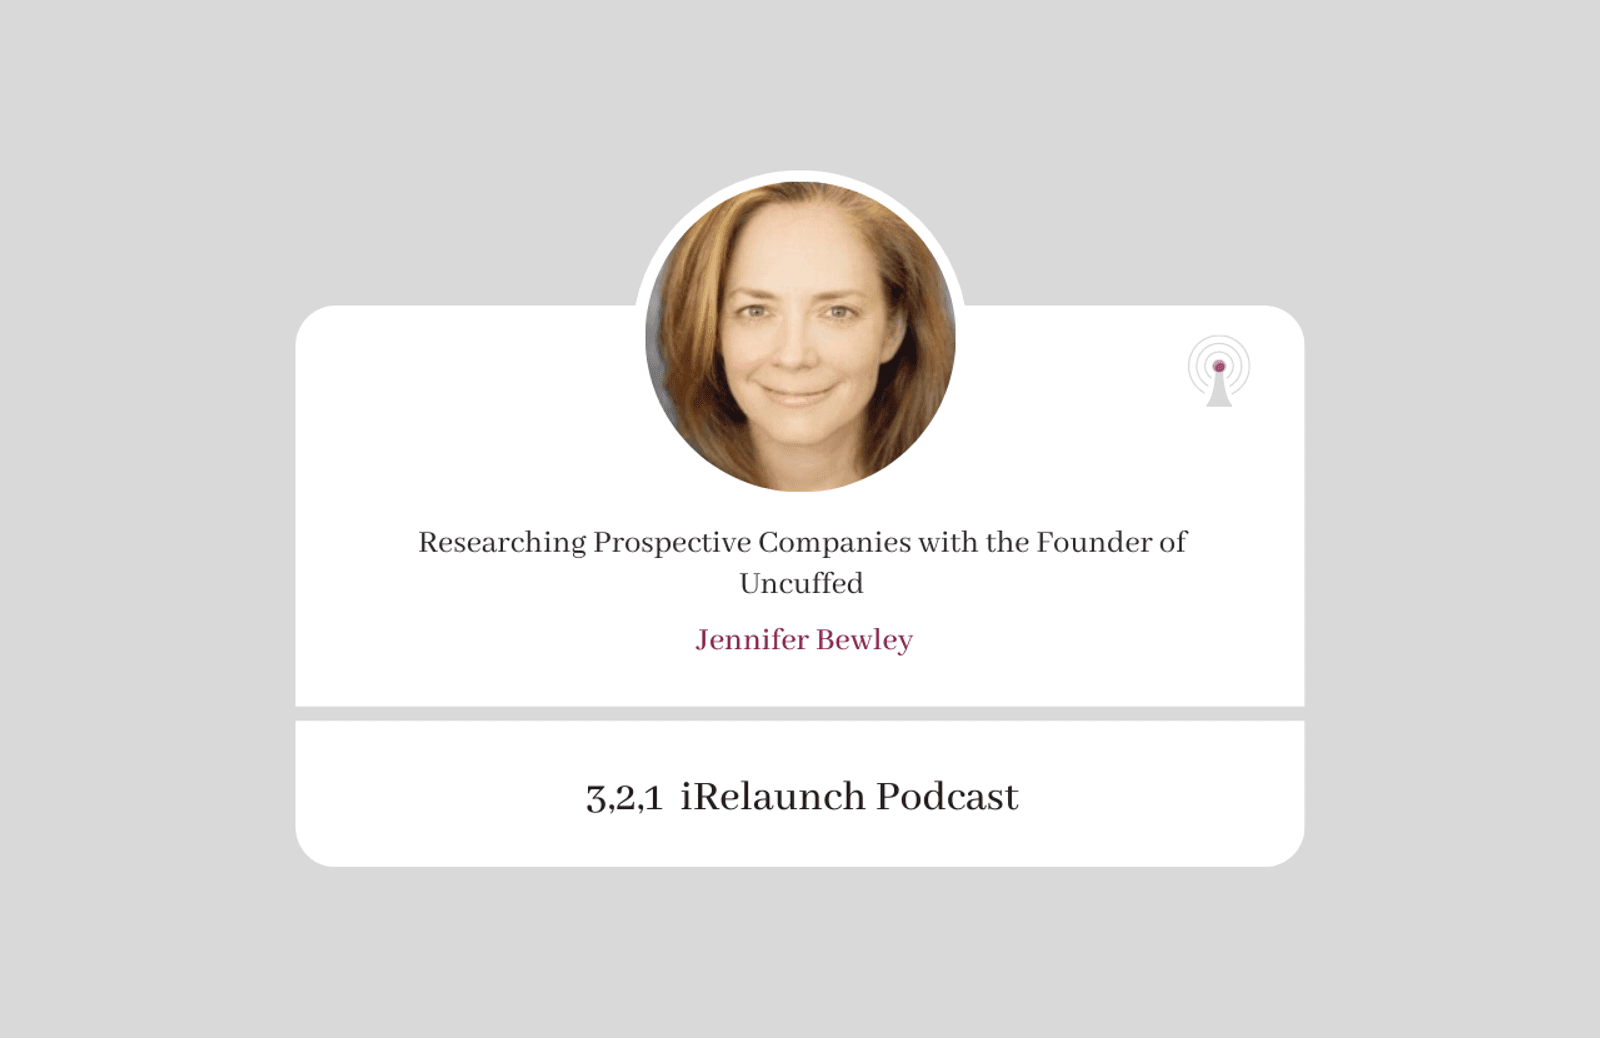 3, 2, 1 iRelaunch Podcast Thumbnail for Episode #81 with Jennifer Bewley's headshot. The episode's title is: "Researching Prospective Companies with the Founder of Uncuffed."